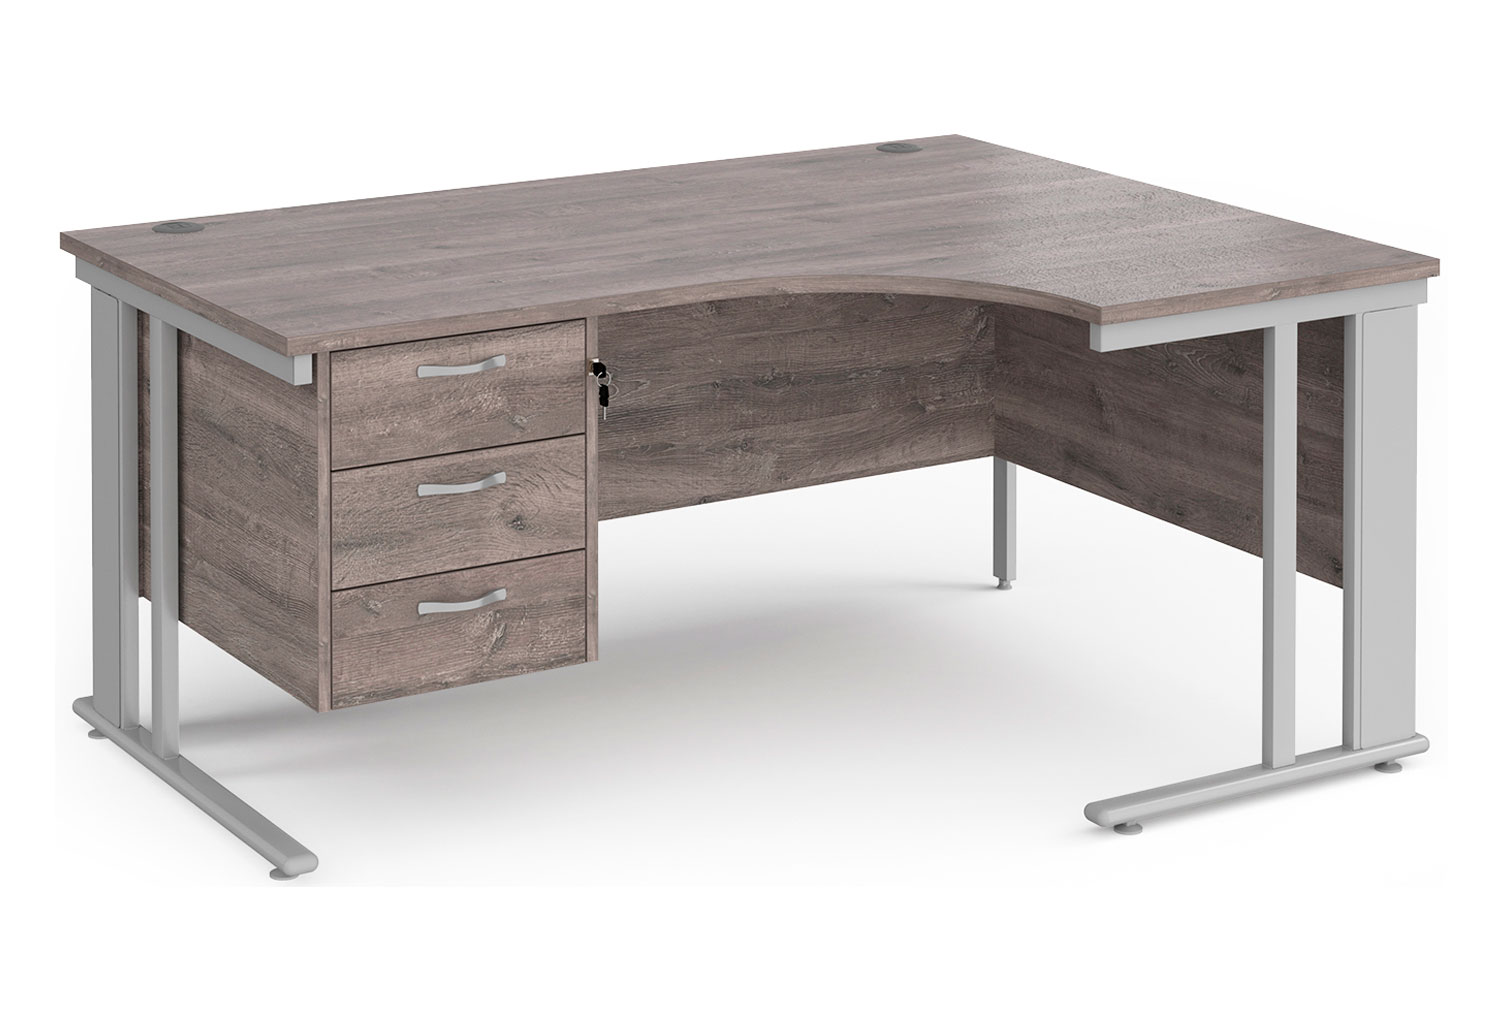 Value Line Deluxe Cable Managed Right Hand Ergo Office Desk 3 Drawers (Silver Legs), 160wx80dx73h (cm), Grey Oak